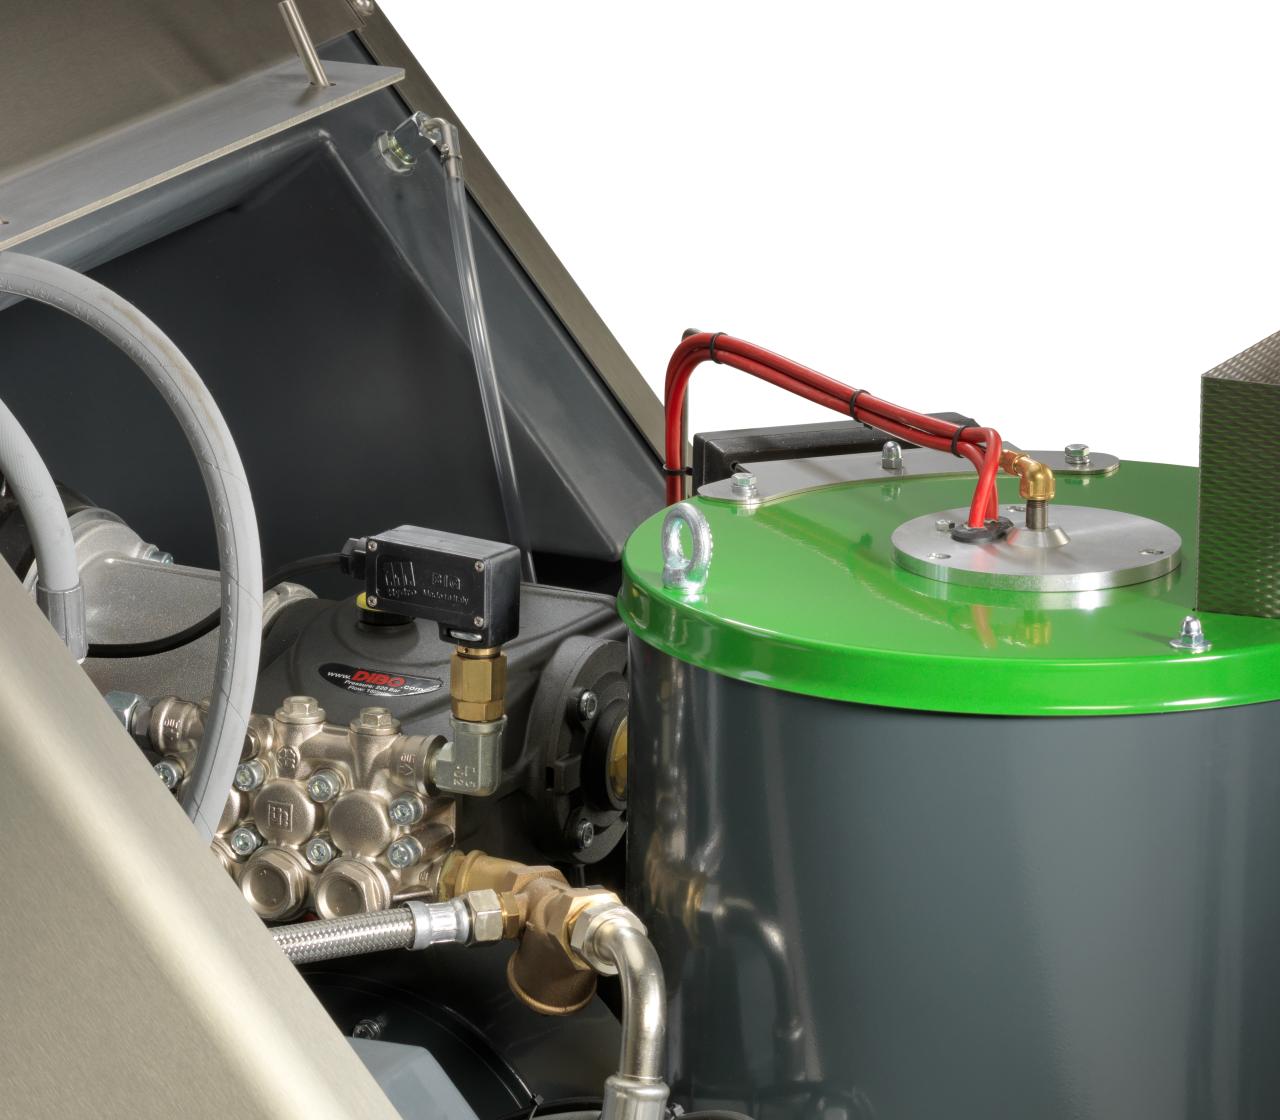 Detail of the GreenBoiler in an IBH-M hot water high-pressure cleaner